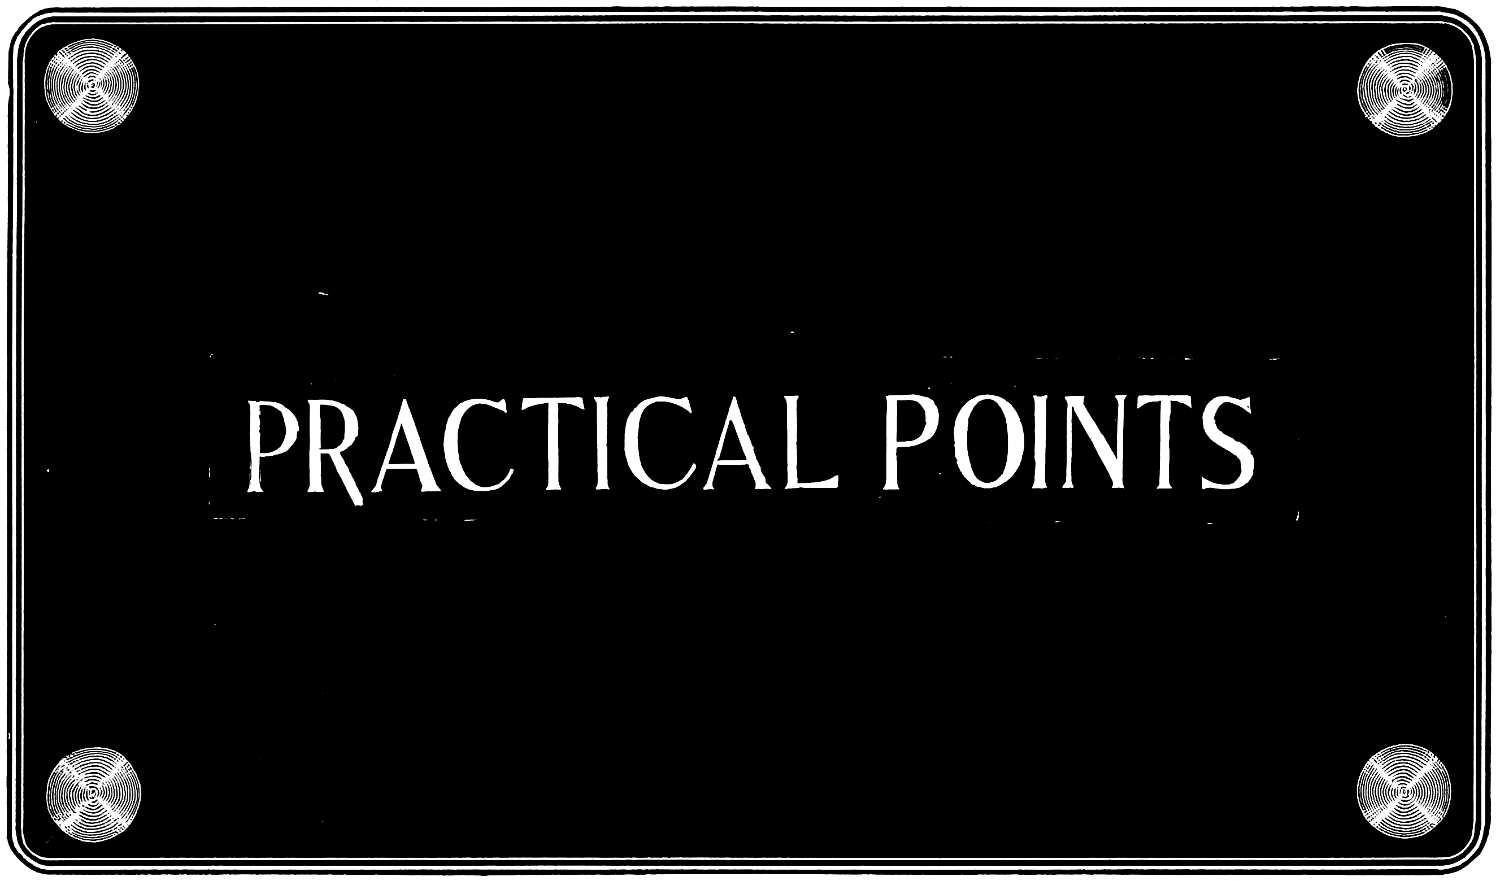 PRACTICAL POINTS